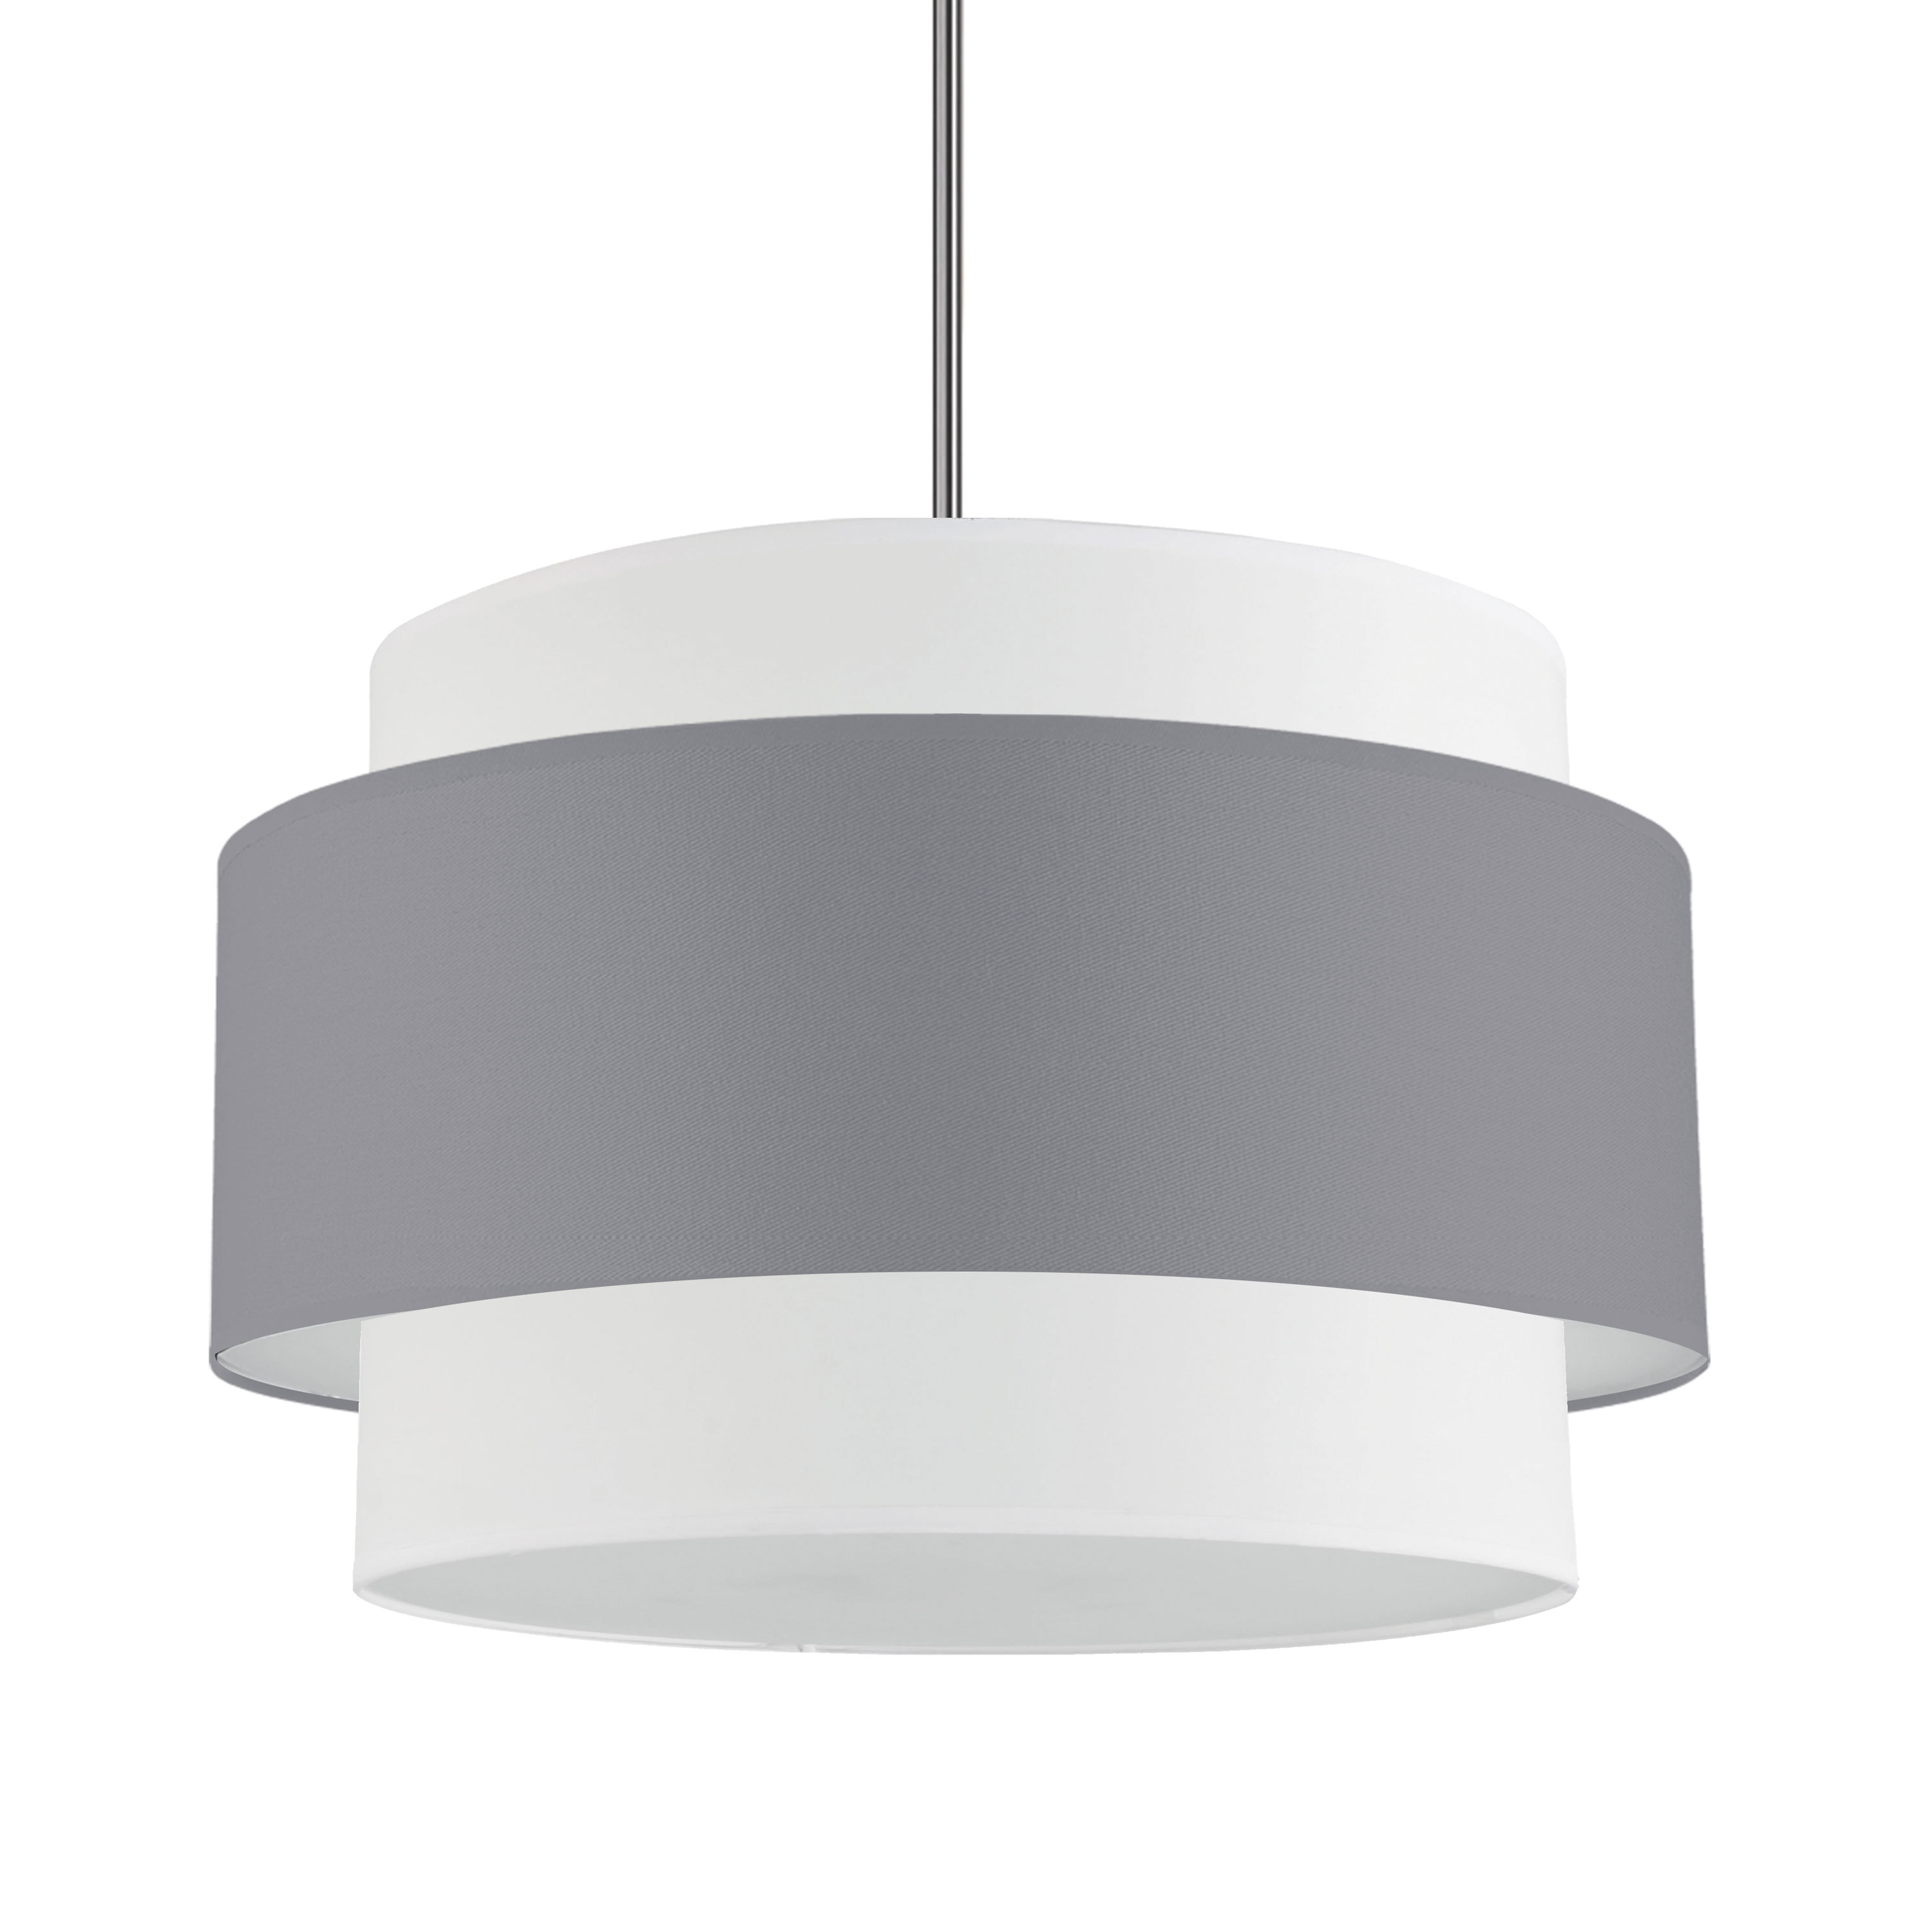 4LT Incandescent Chandelier, PC w/ GRY&WH Shade